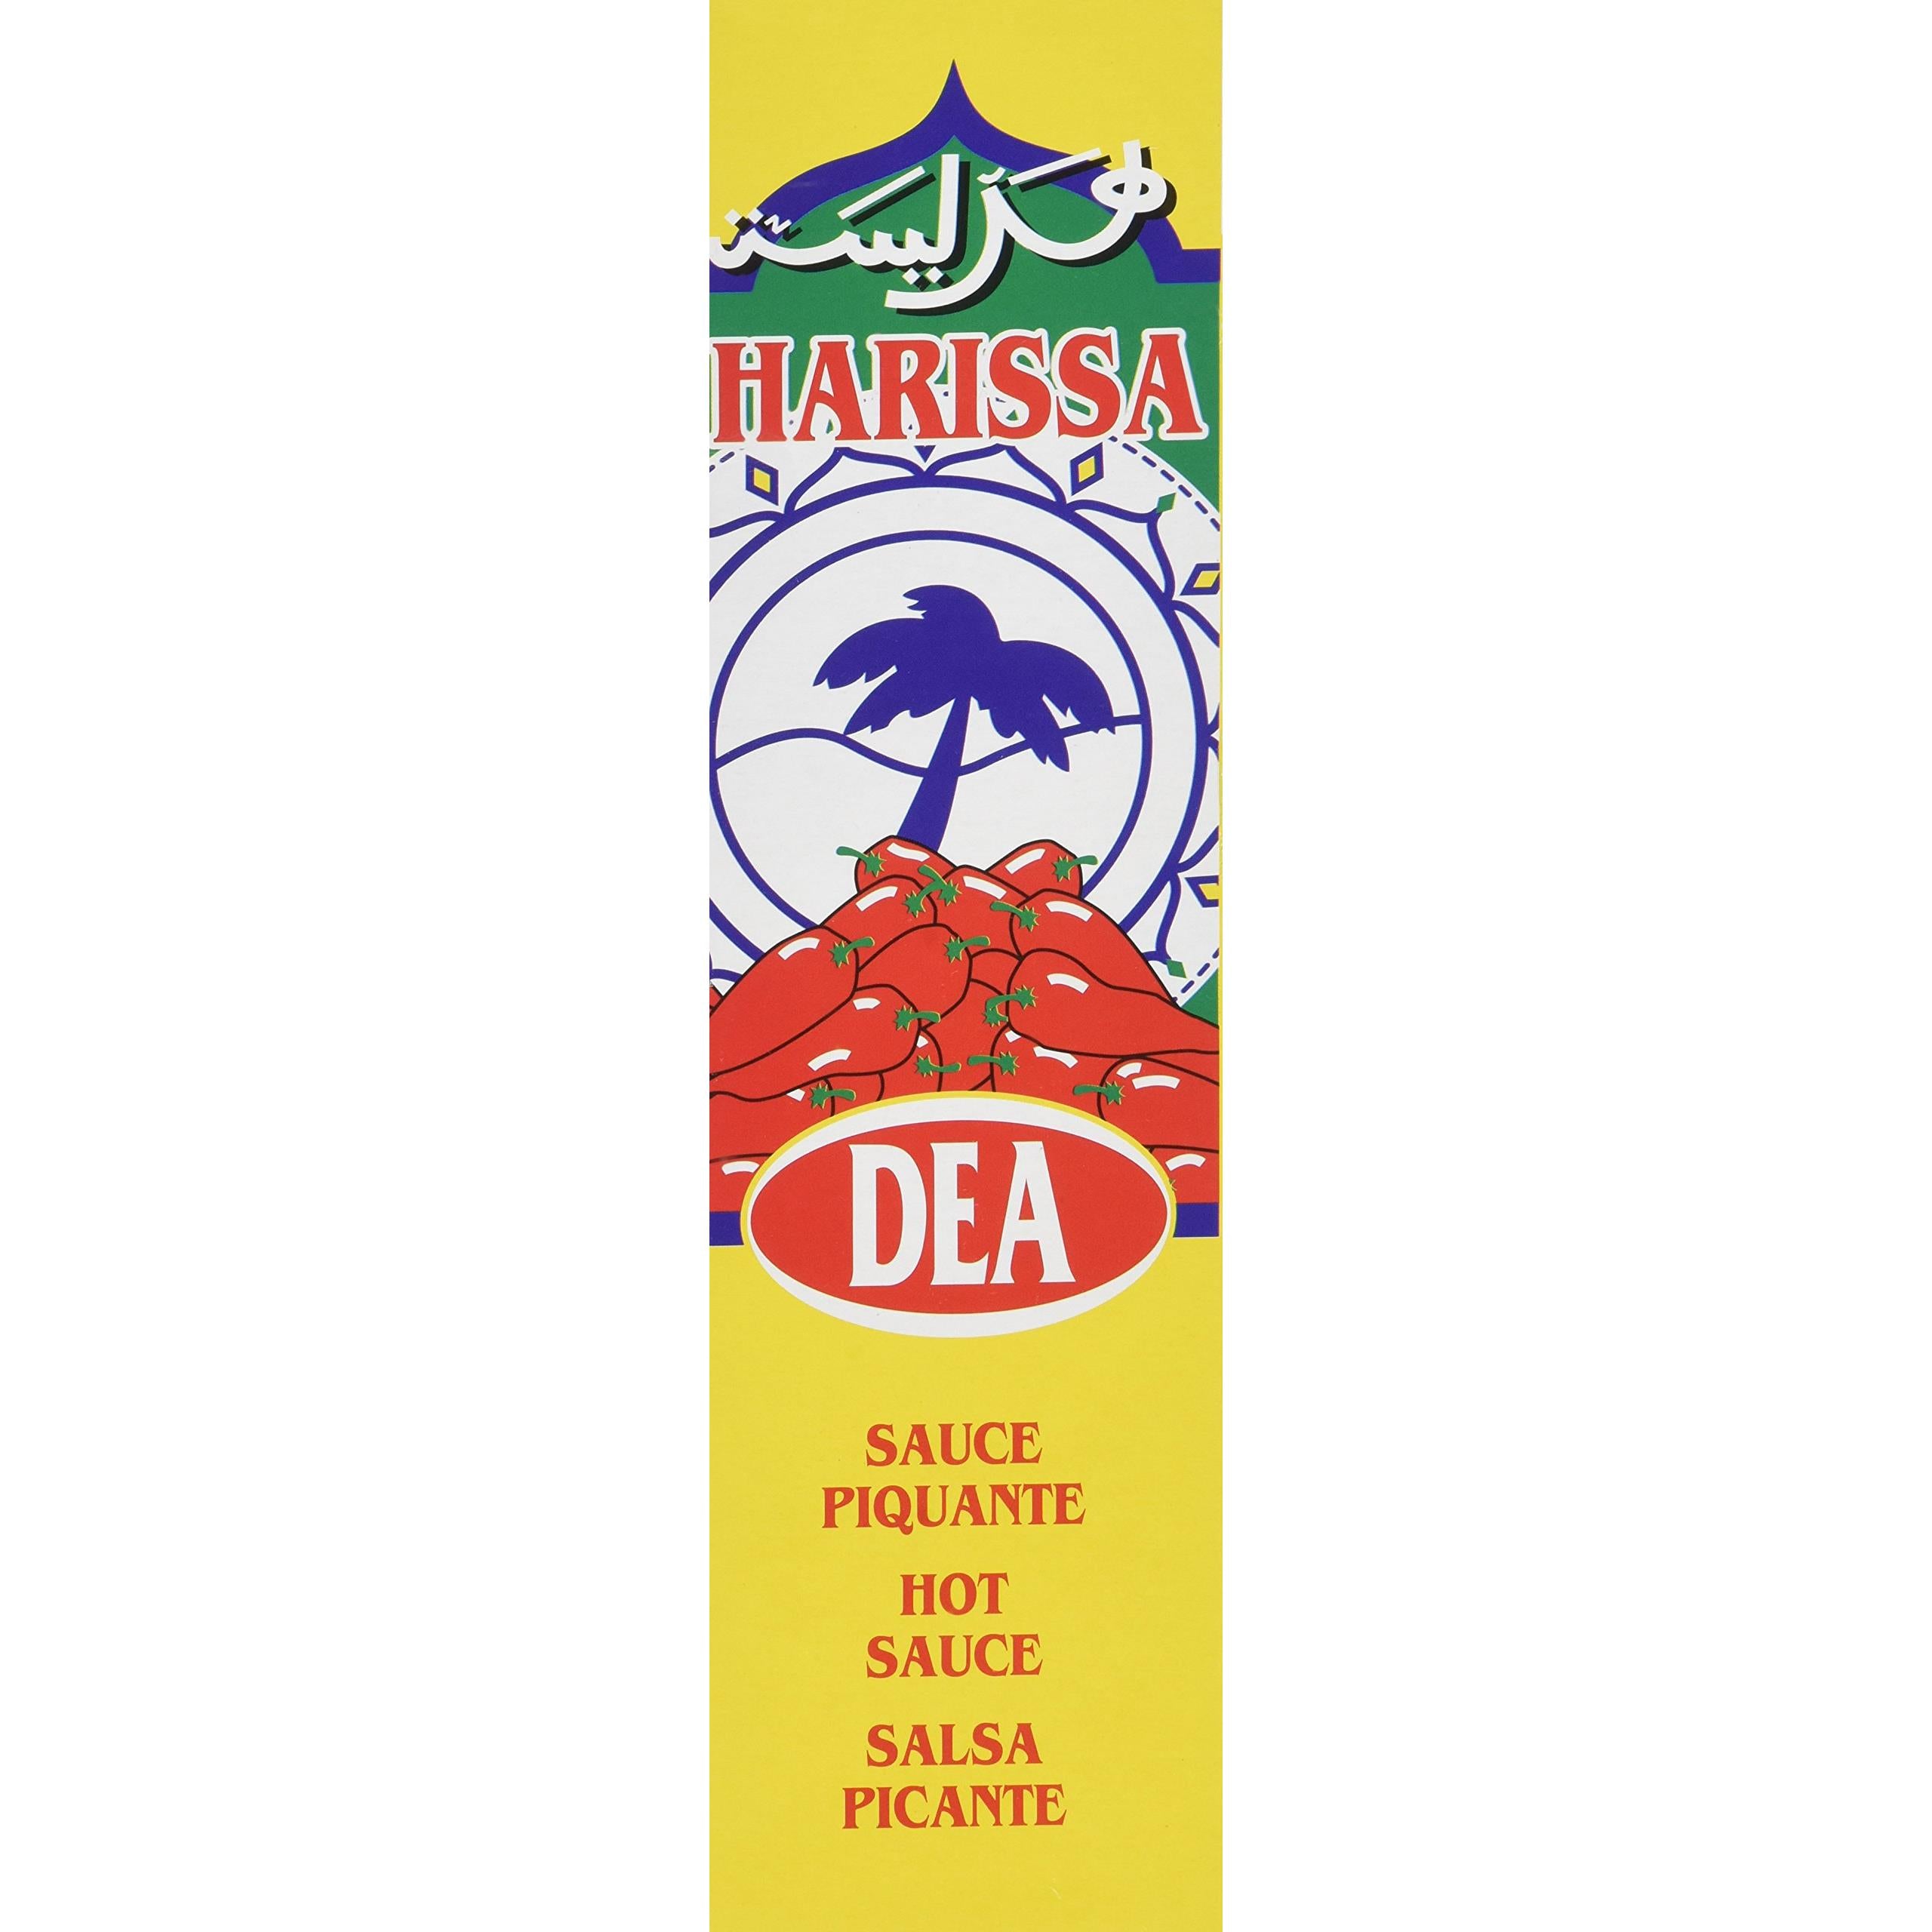 Dea Harissa Hot Sauce From France 2 Pack Combo 2X4.2 oz (Pack of 2 )